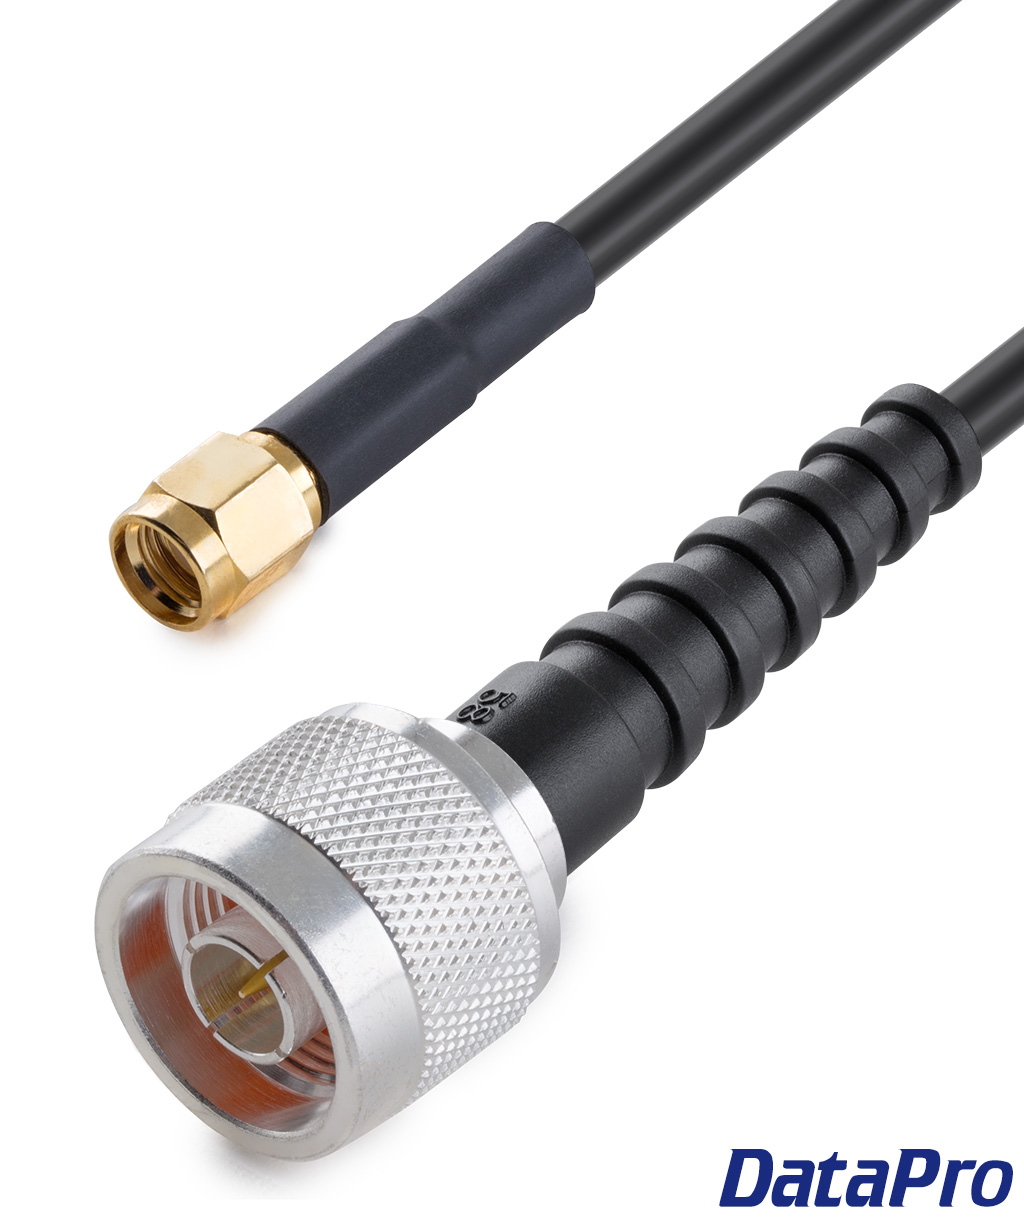 Ancable N-Type Male to RP-SMA Female Wi-Fi Antenna Cable Adaptor 